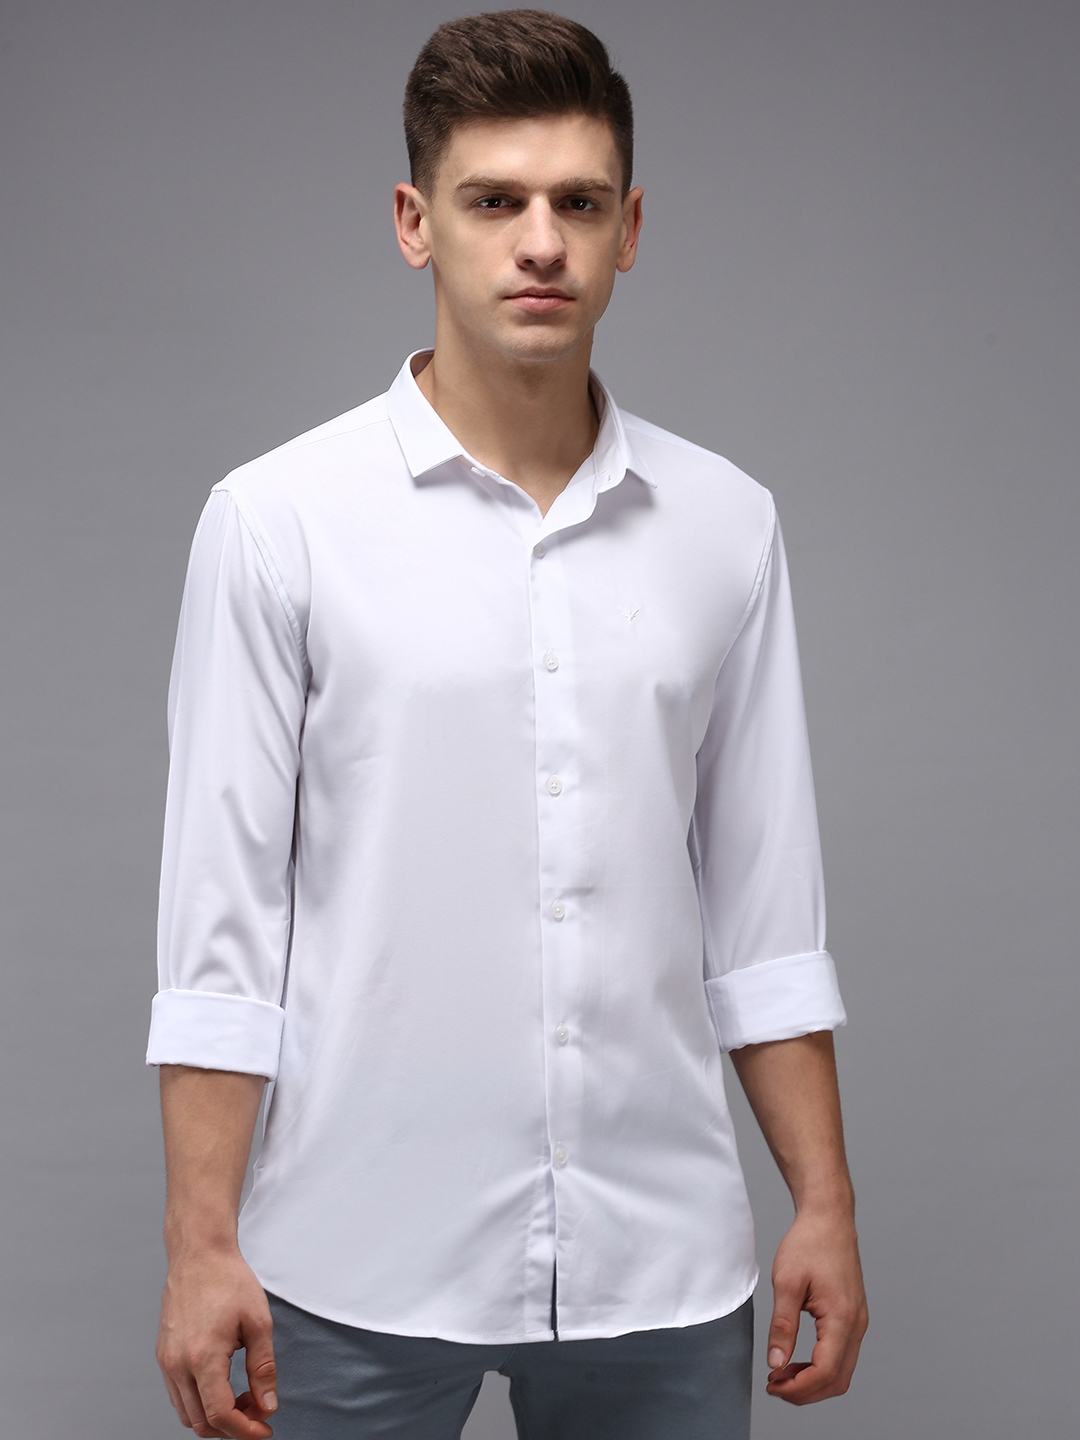 SHOWOFF Men's White Spread Collar Solid Classic Fit Shirt